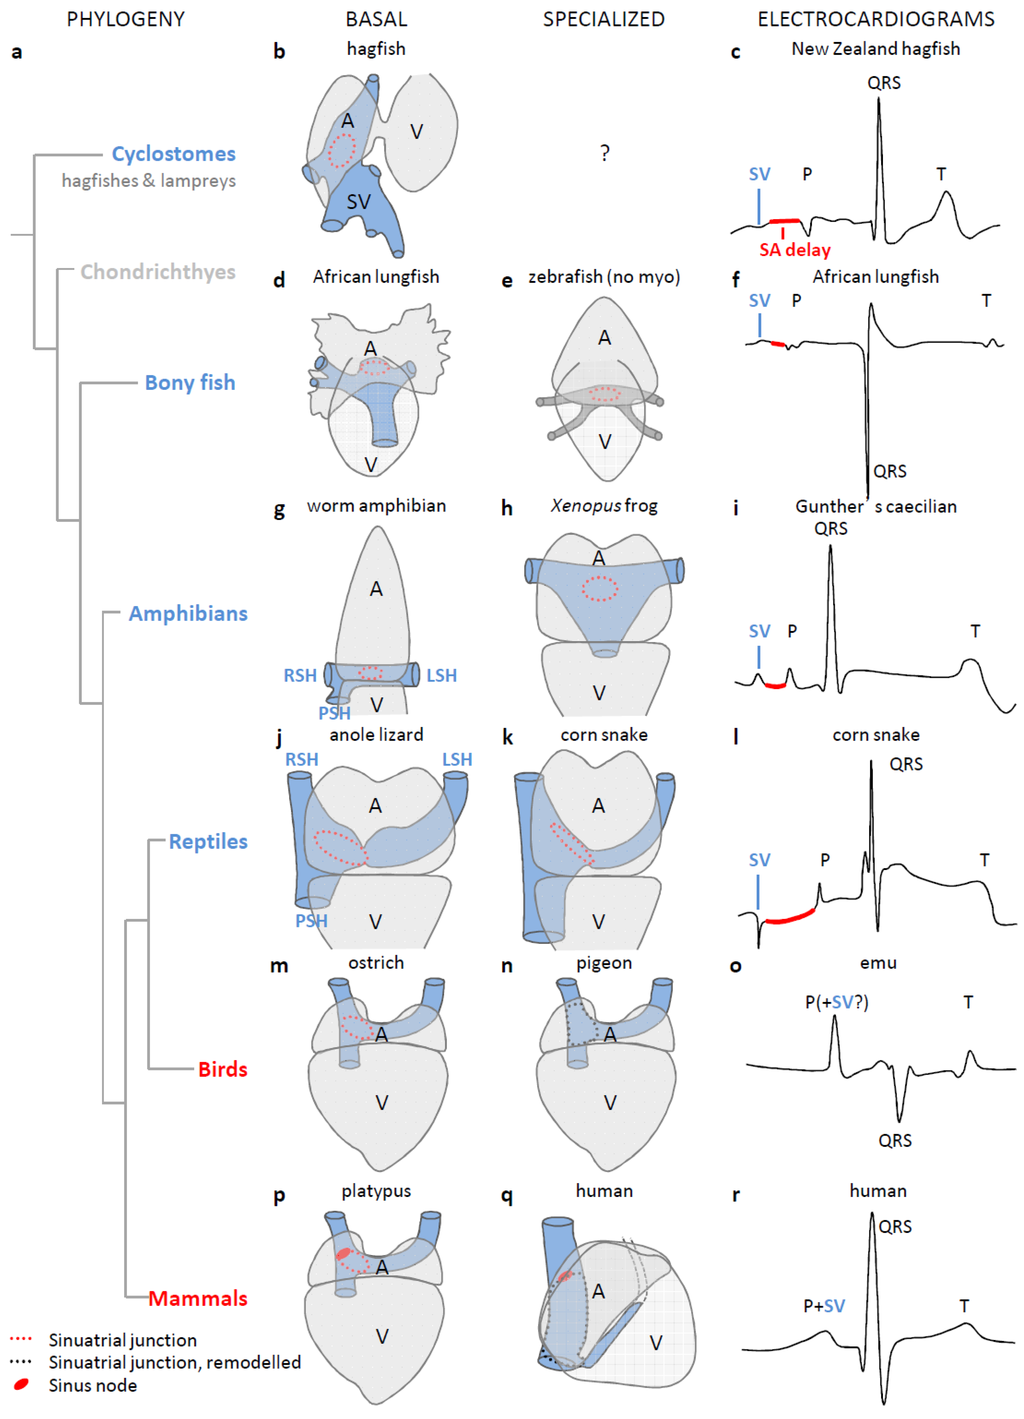 Jcdd Free Full Text Evolution Of The Sinus Venosus From Fish To Human Html